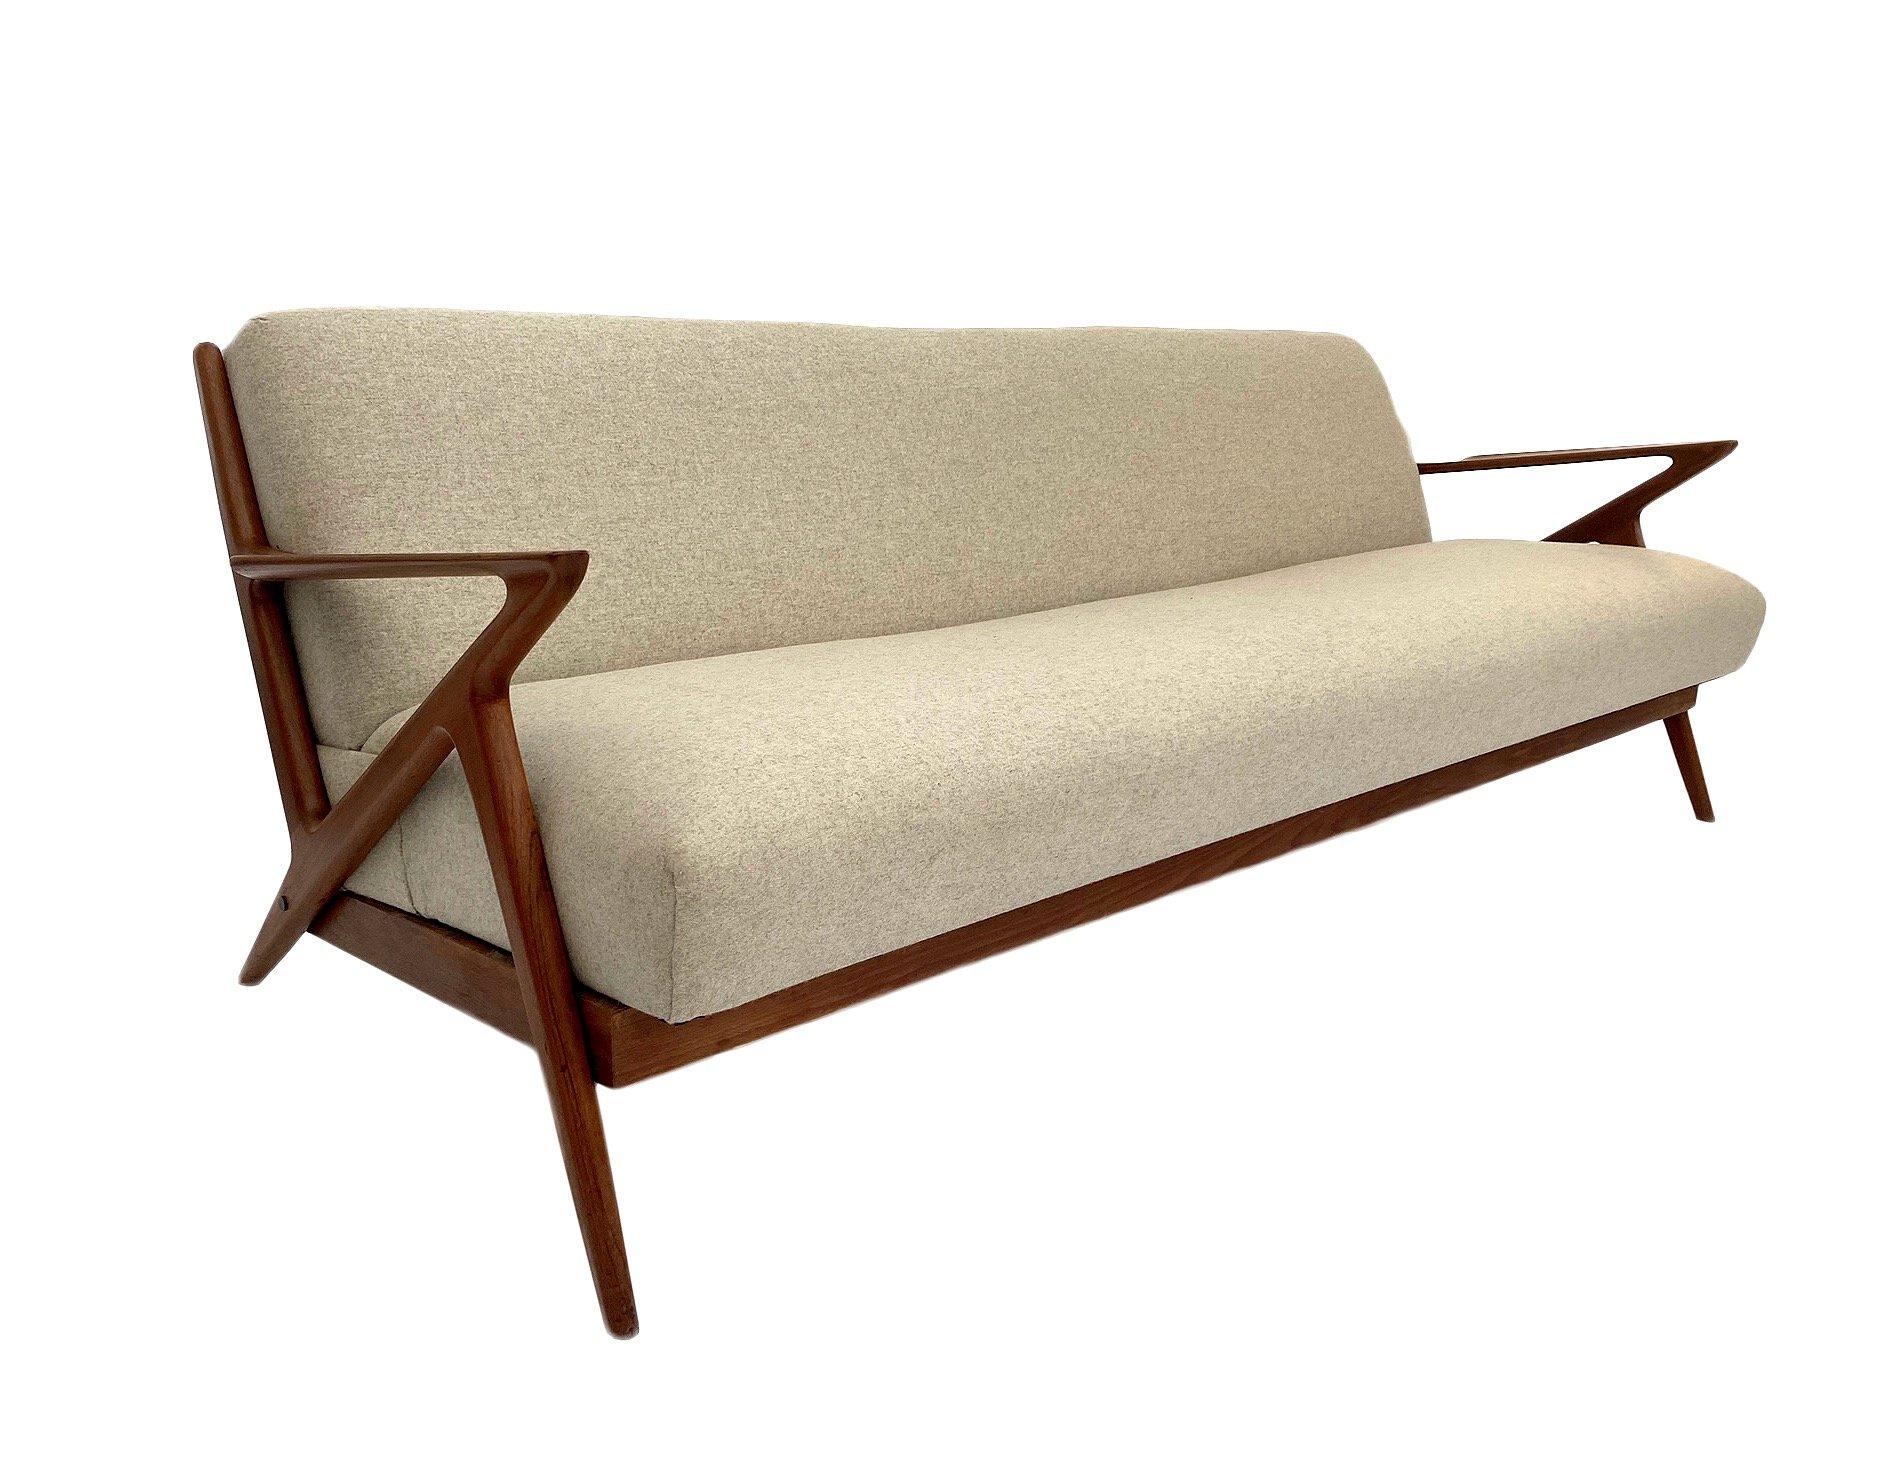 Mid-Century Modern Poul Jensen Model 'Z' Cream Wool and Teak 3 Seater Sofabed for Selig Ope Danish